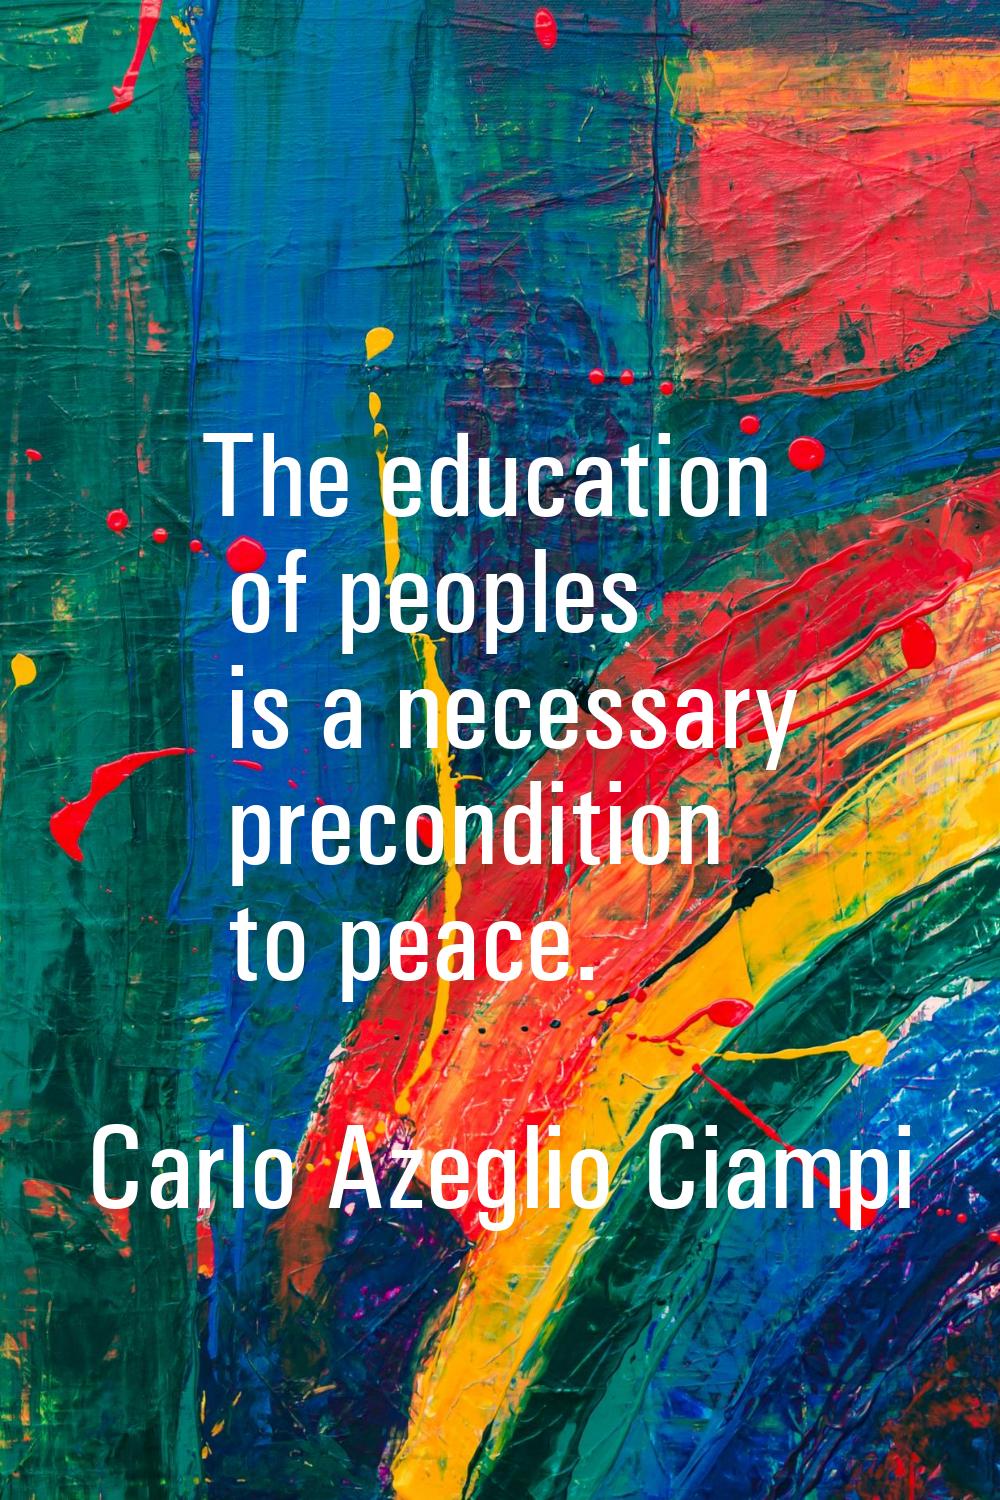 The education of peoples is a necessary precondition to peace.